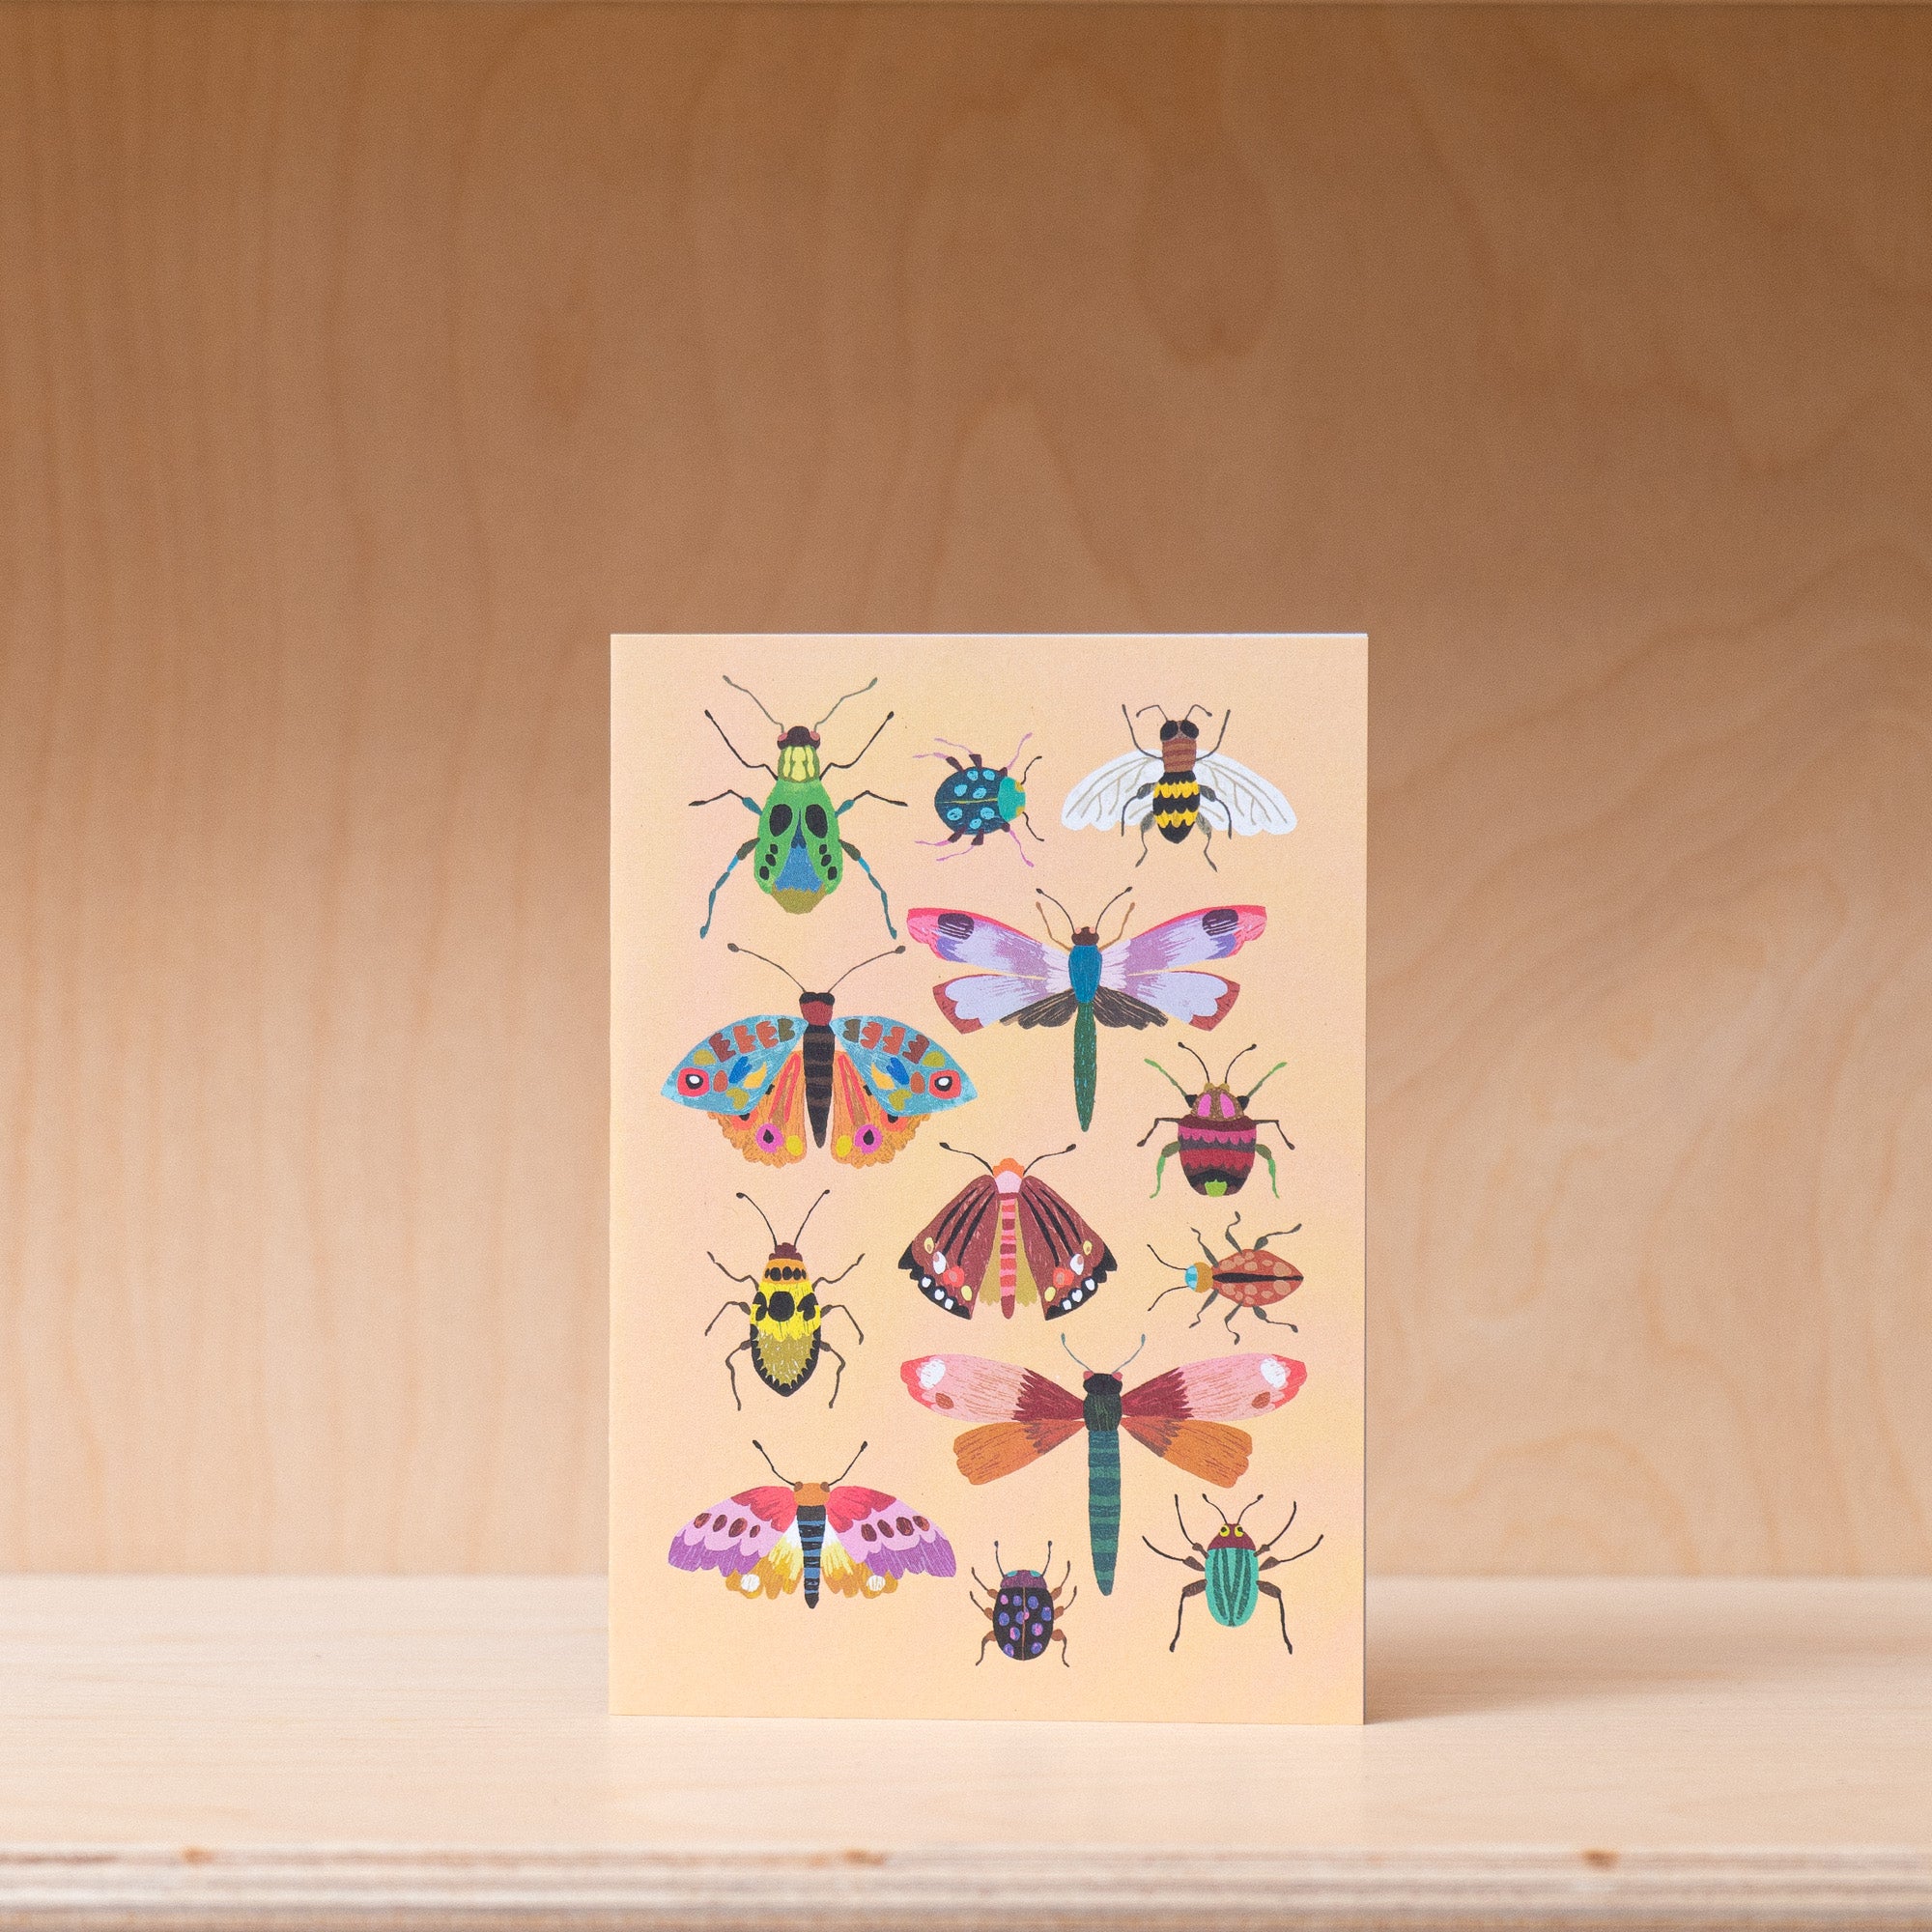 Brie Harrison Insects - Greetings Card